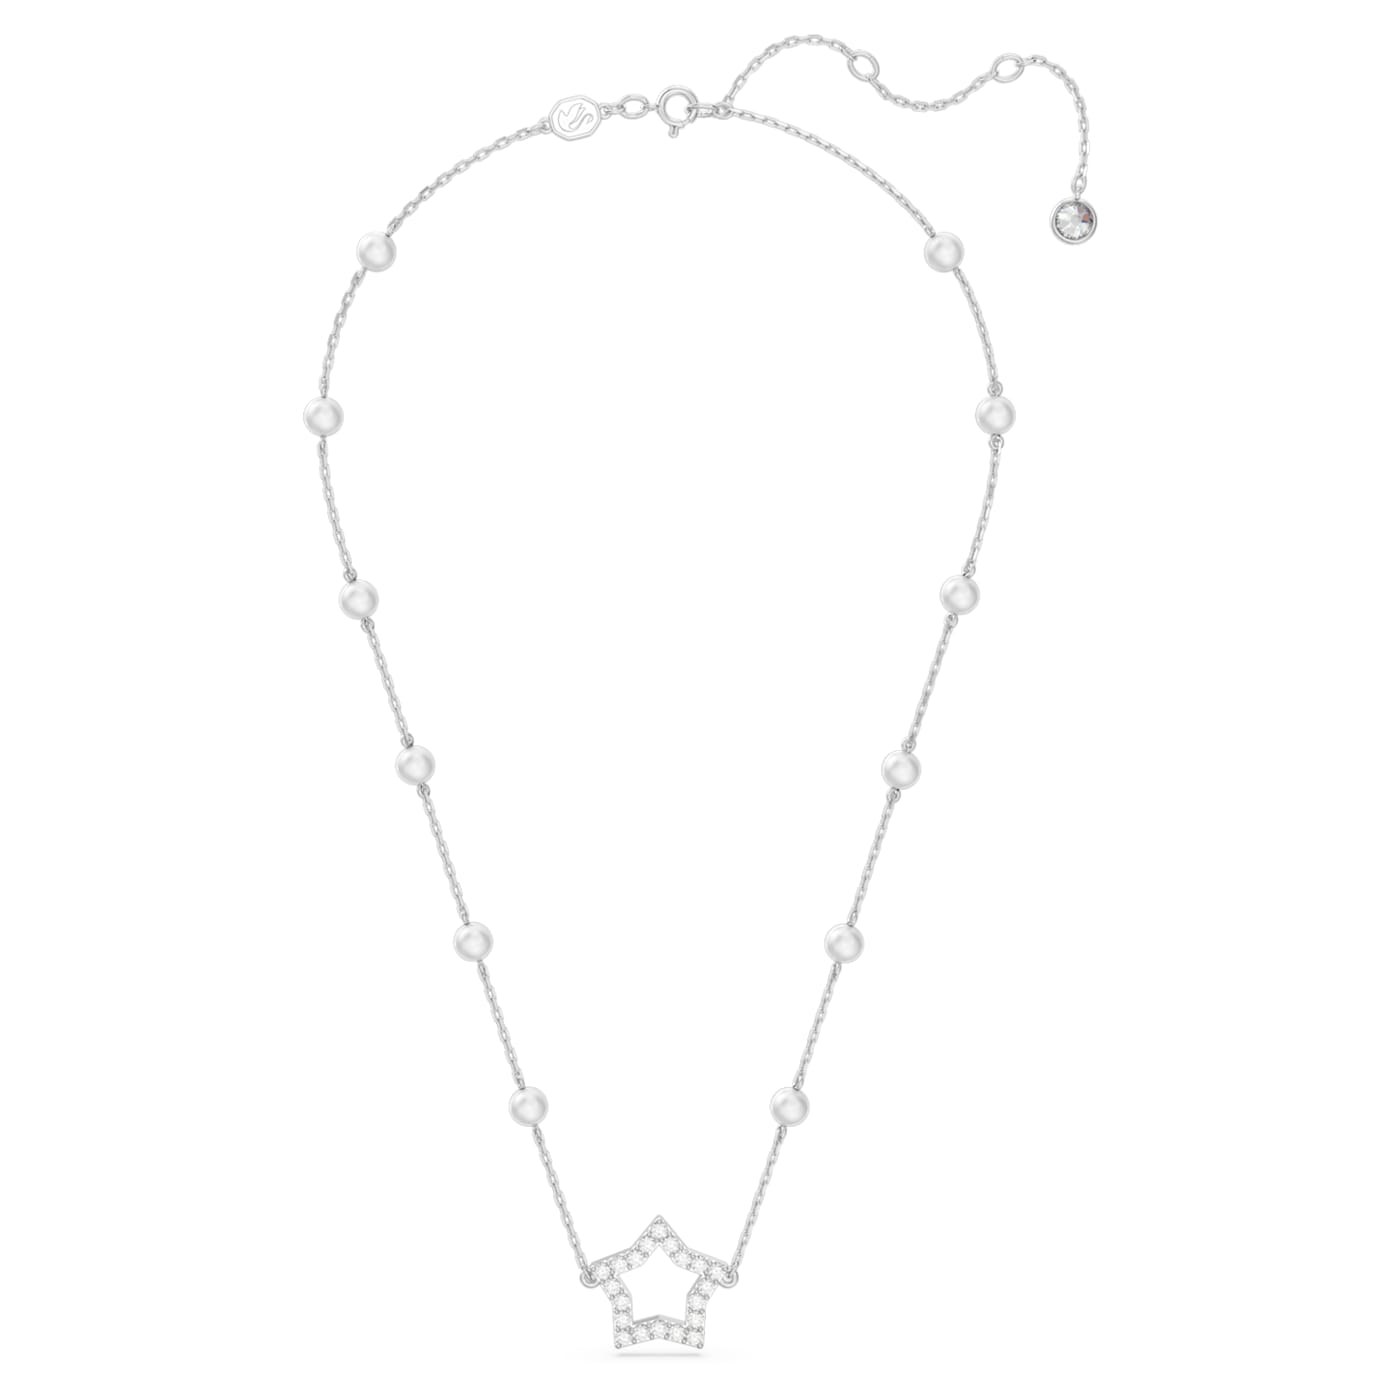 STELLA NECKLACE, PEARL, STAR, RHODIUM PLATED